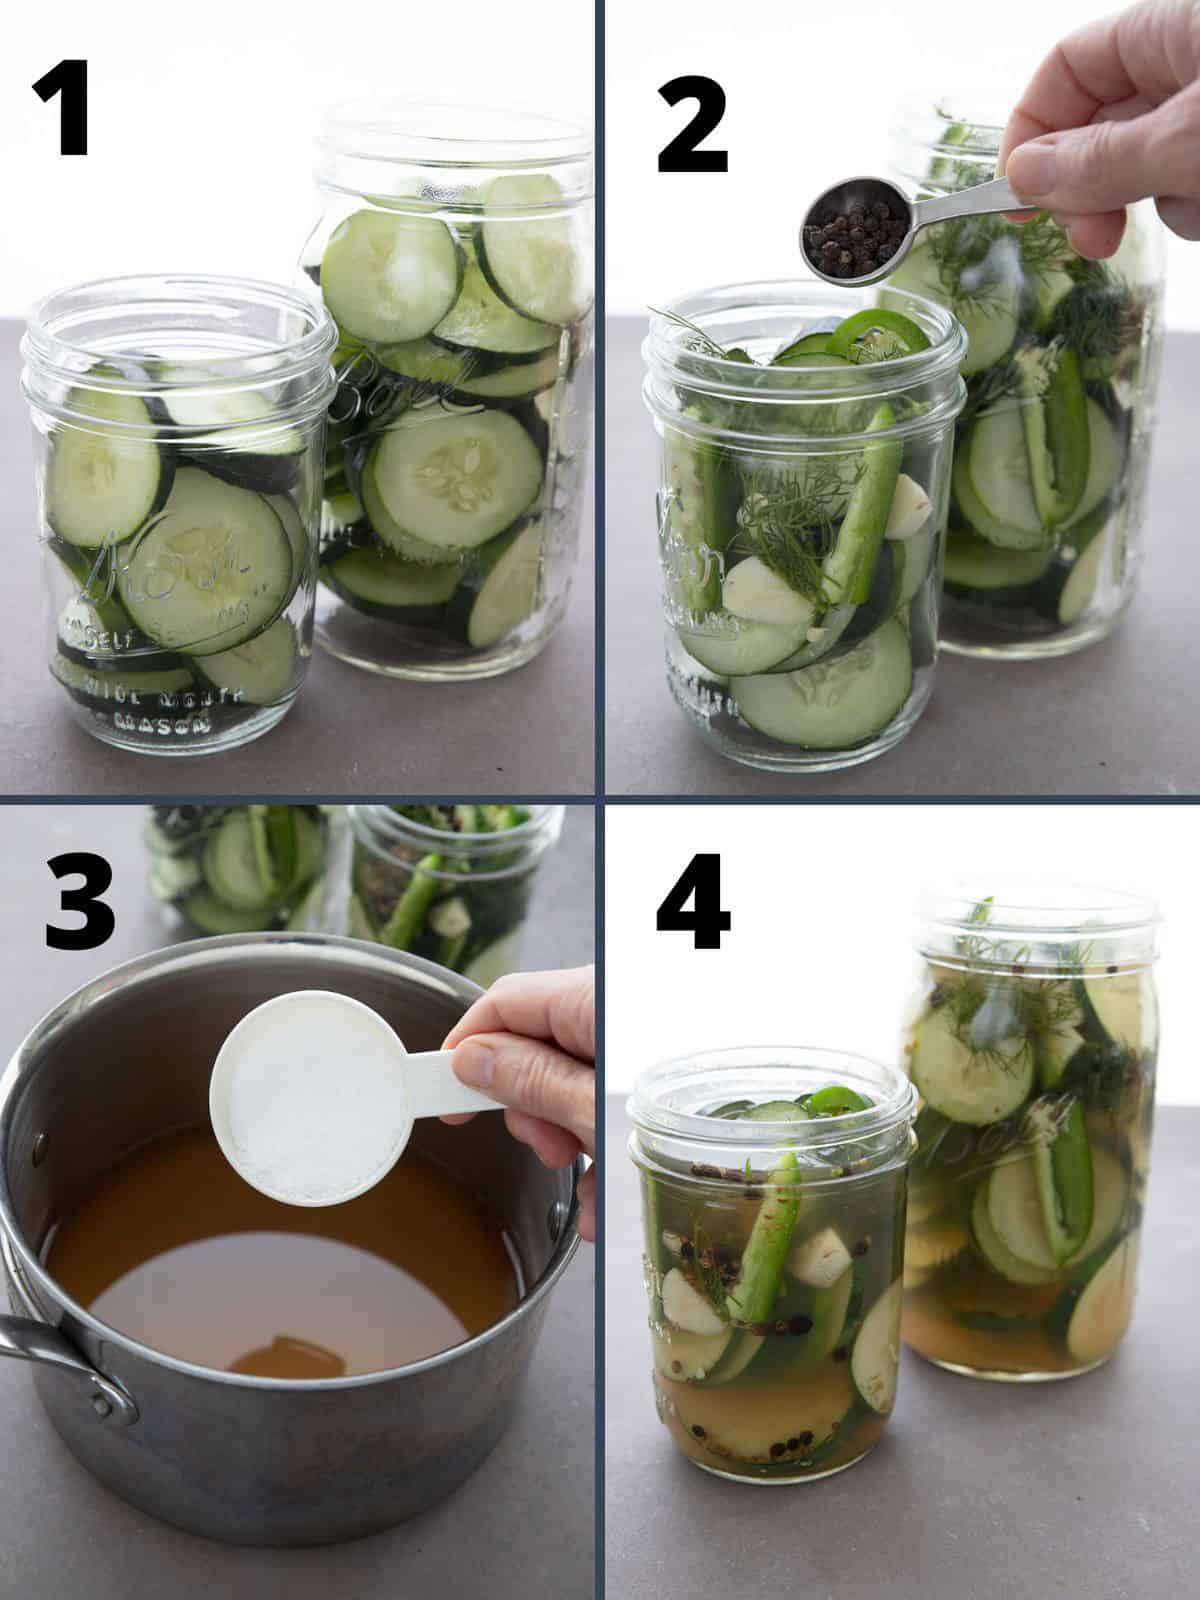 A collage of 4 images showing how to make Refrigerator Pickles.